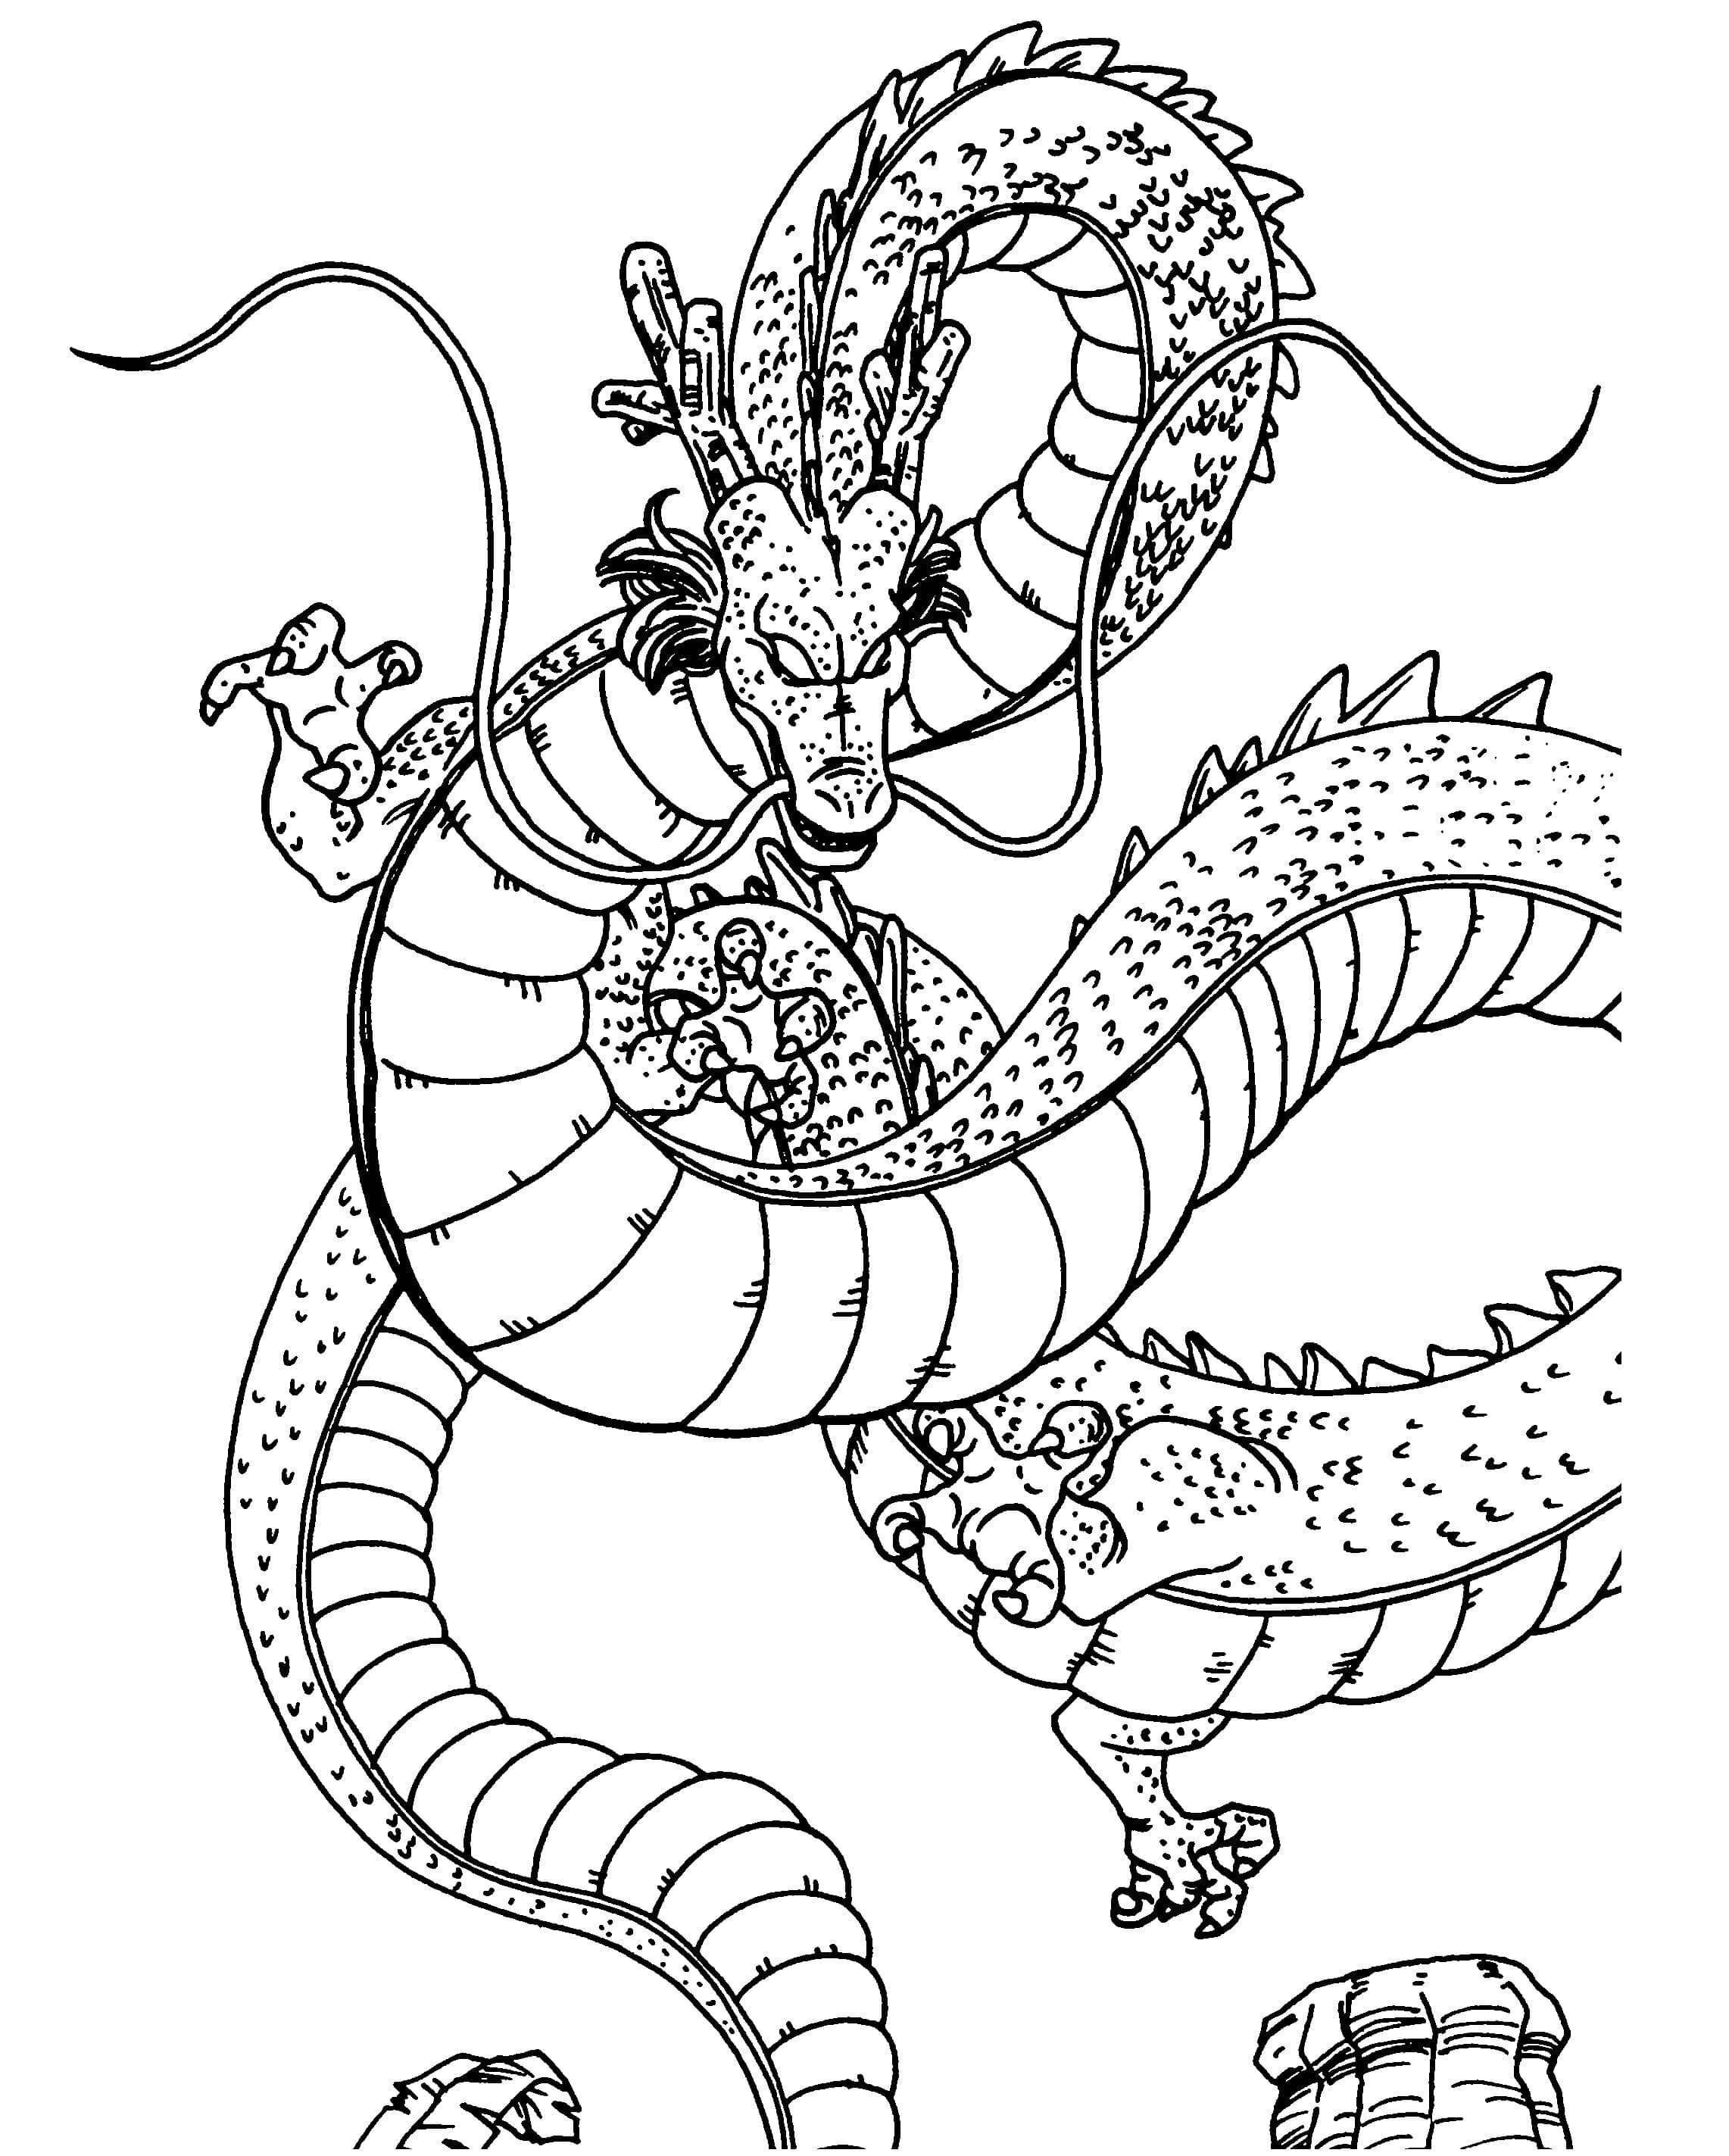 Make A Wish To The Dragon Coloring Page